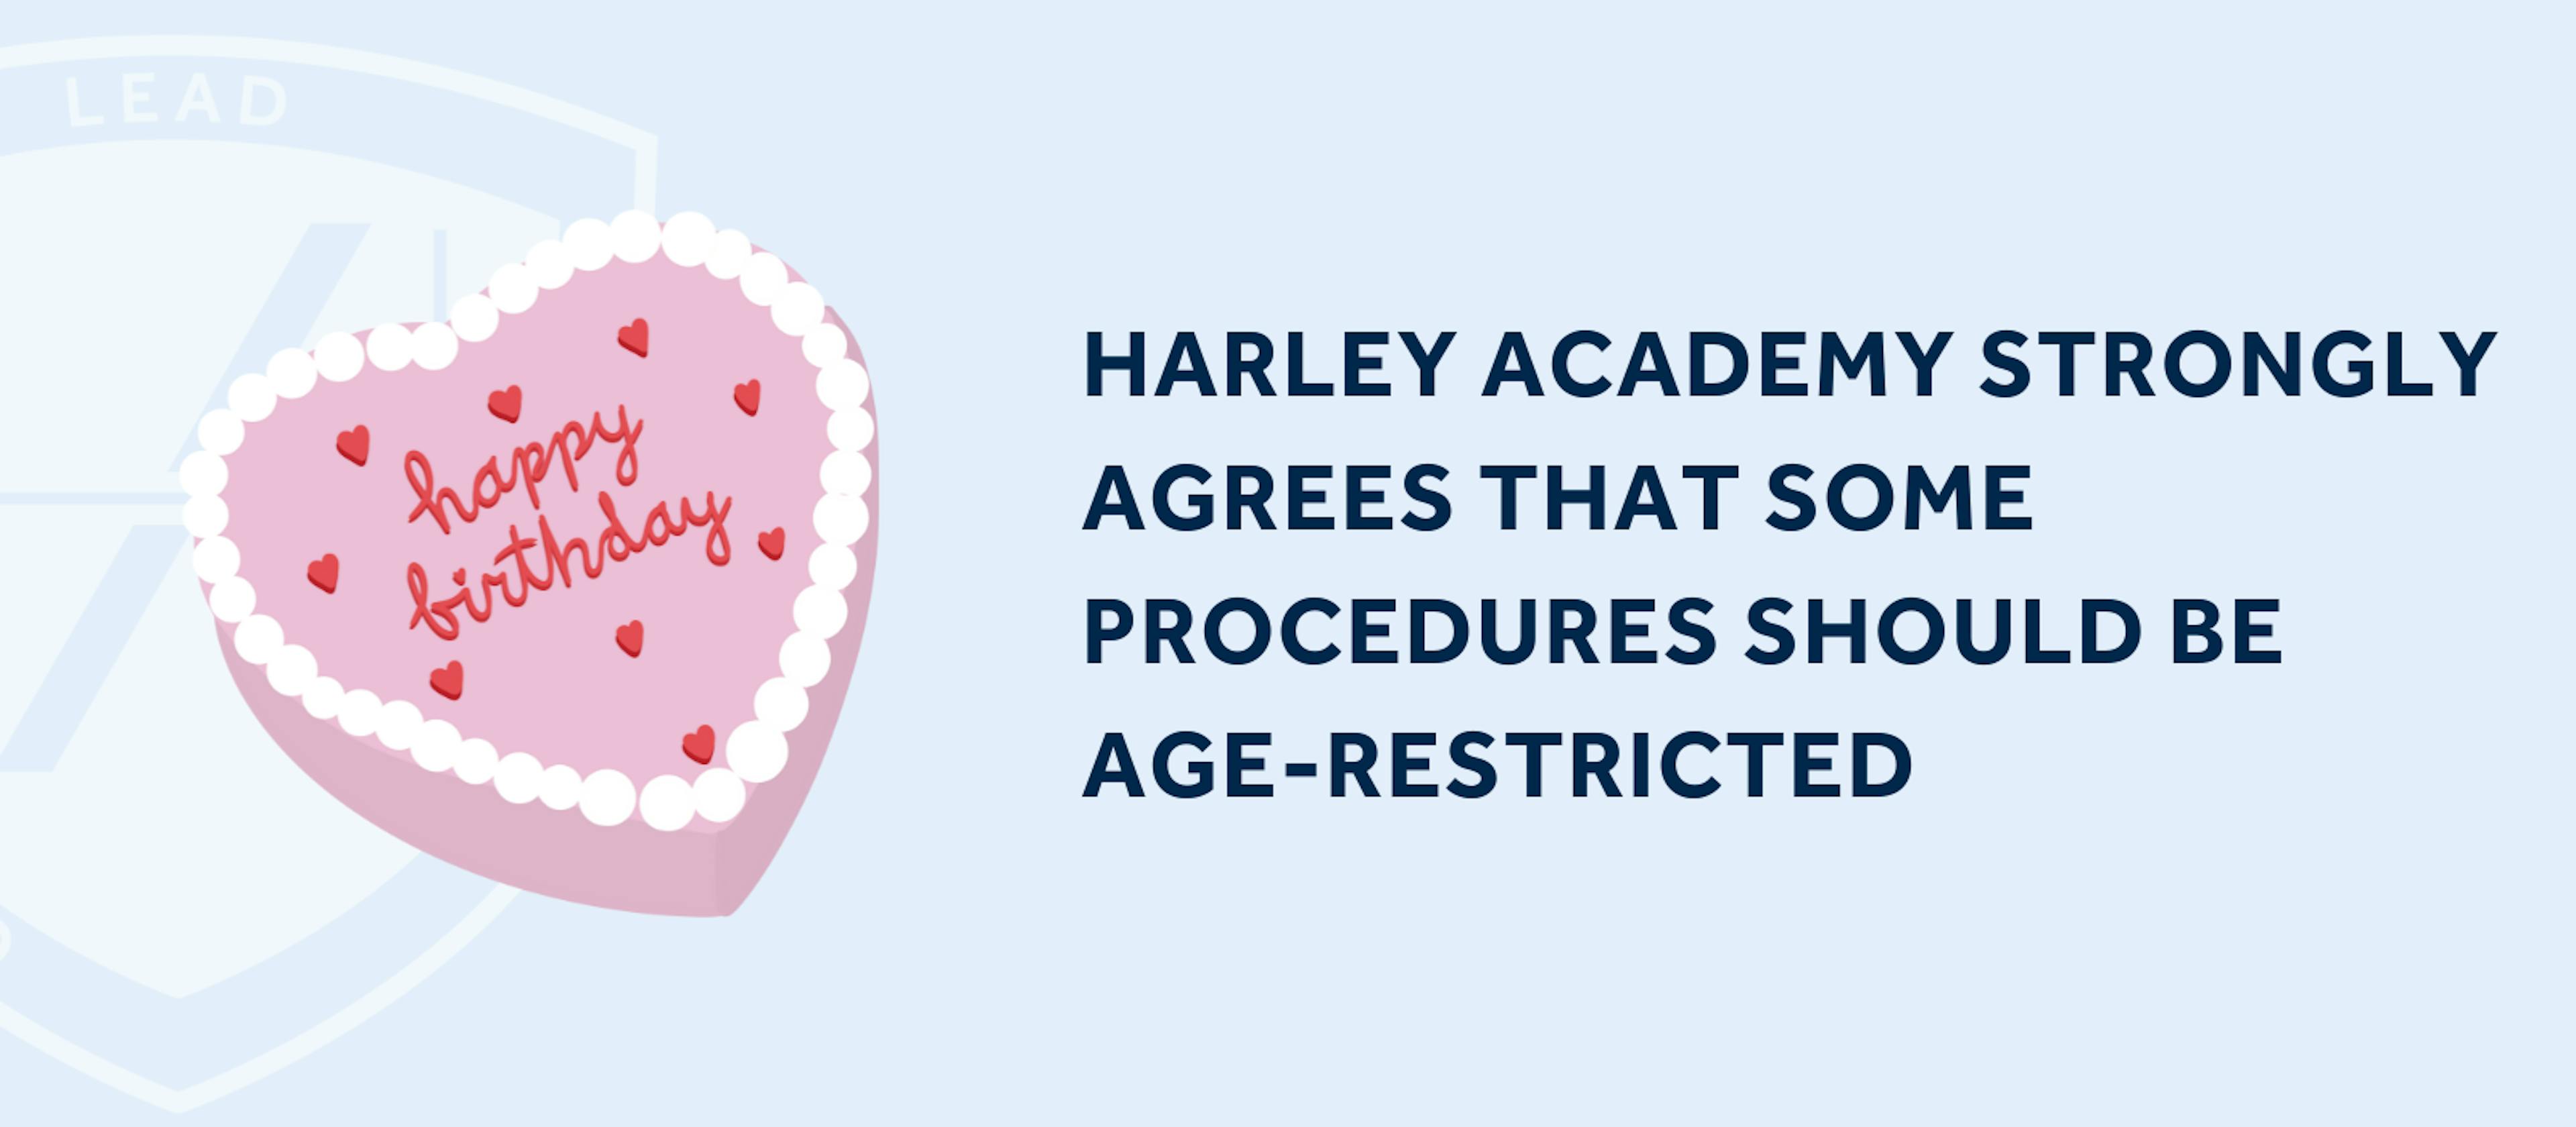 HARLEY ACADEMY AGE-RESTRICTED COSMETIC INJECTABLES RESPONSES TO DHSC CONSULTATION AESTHETICS LICENSING SCHEME 2023